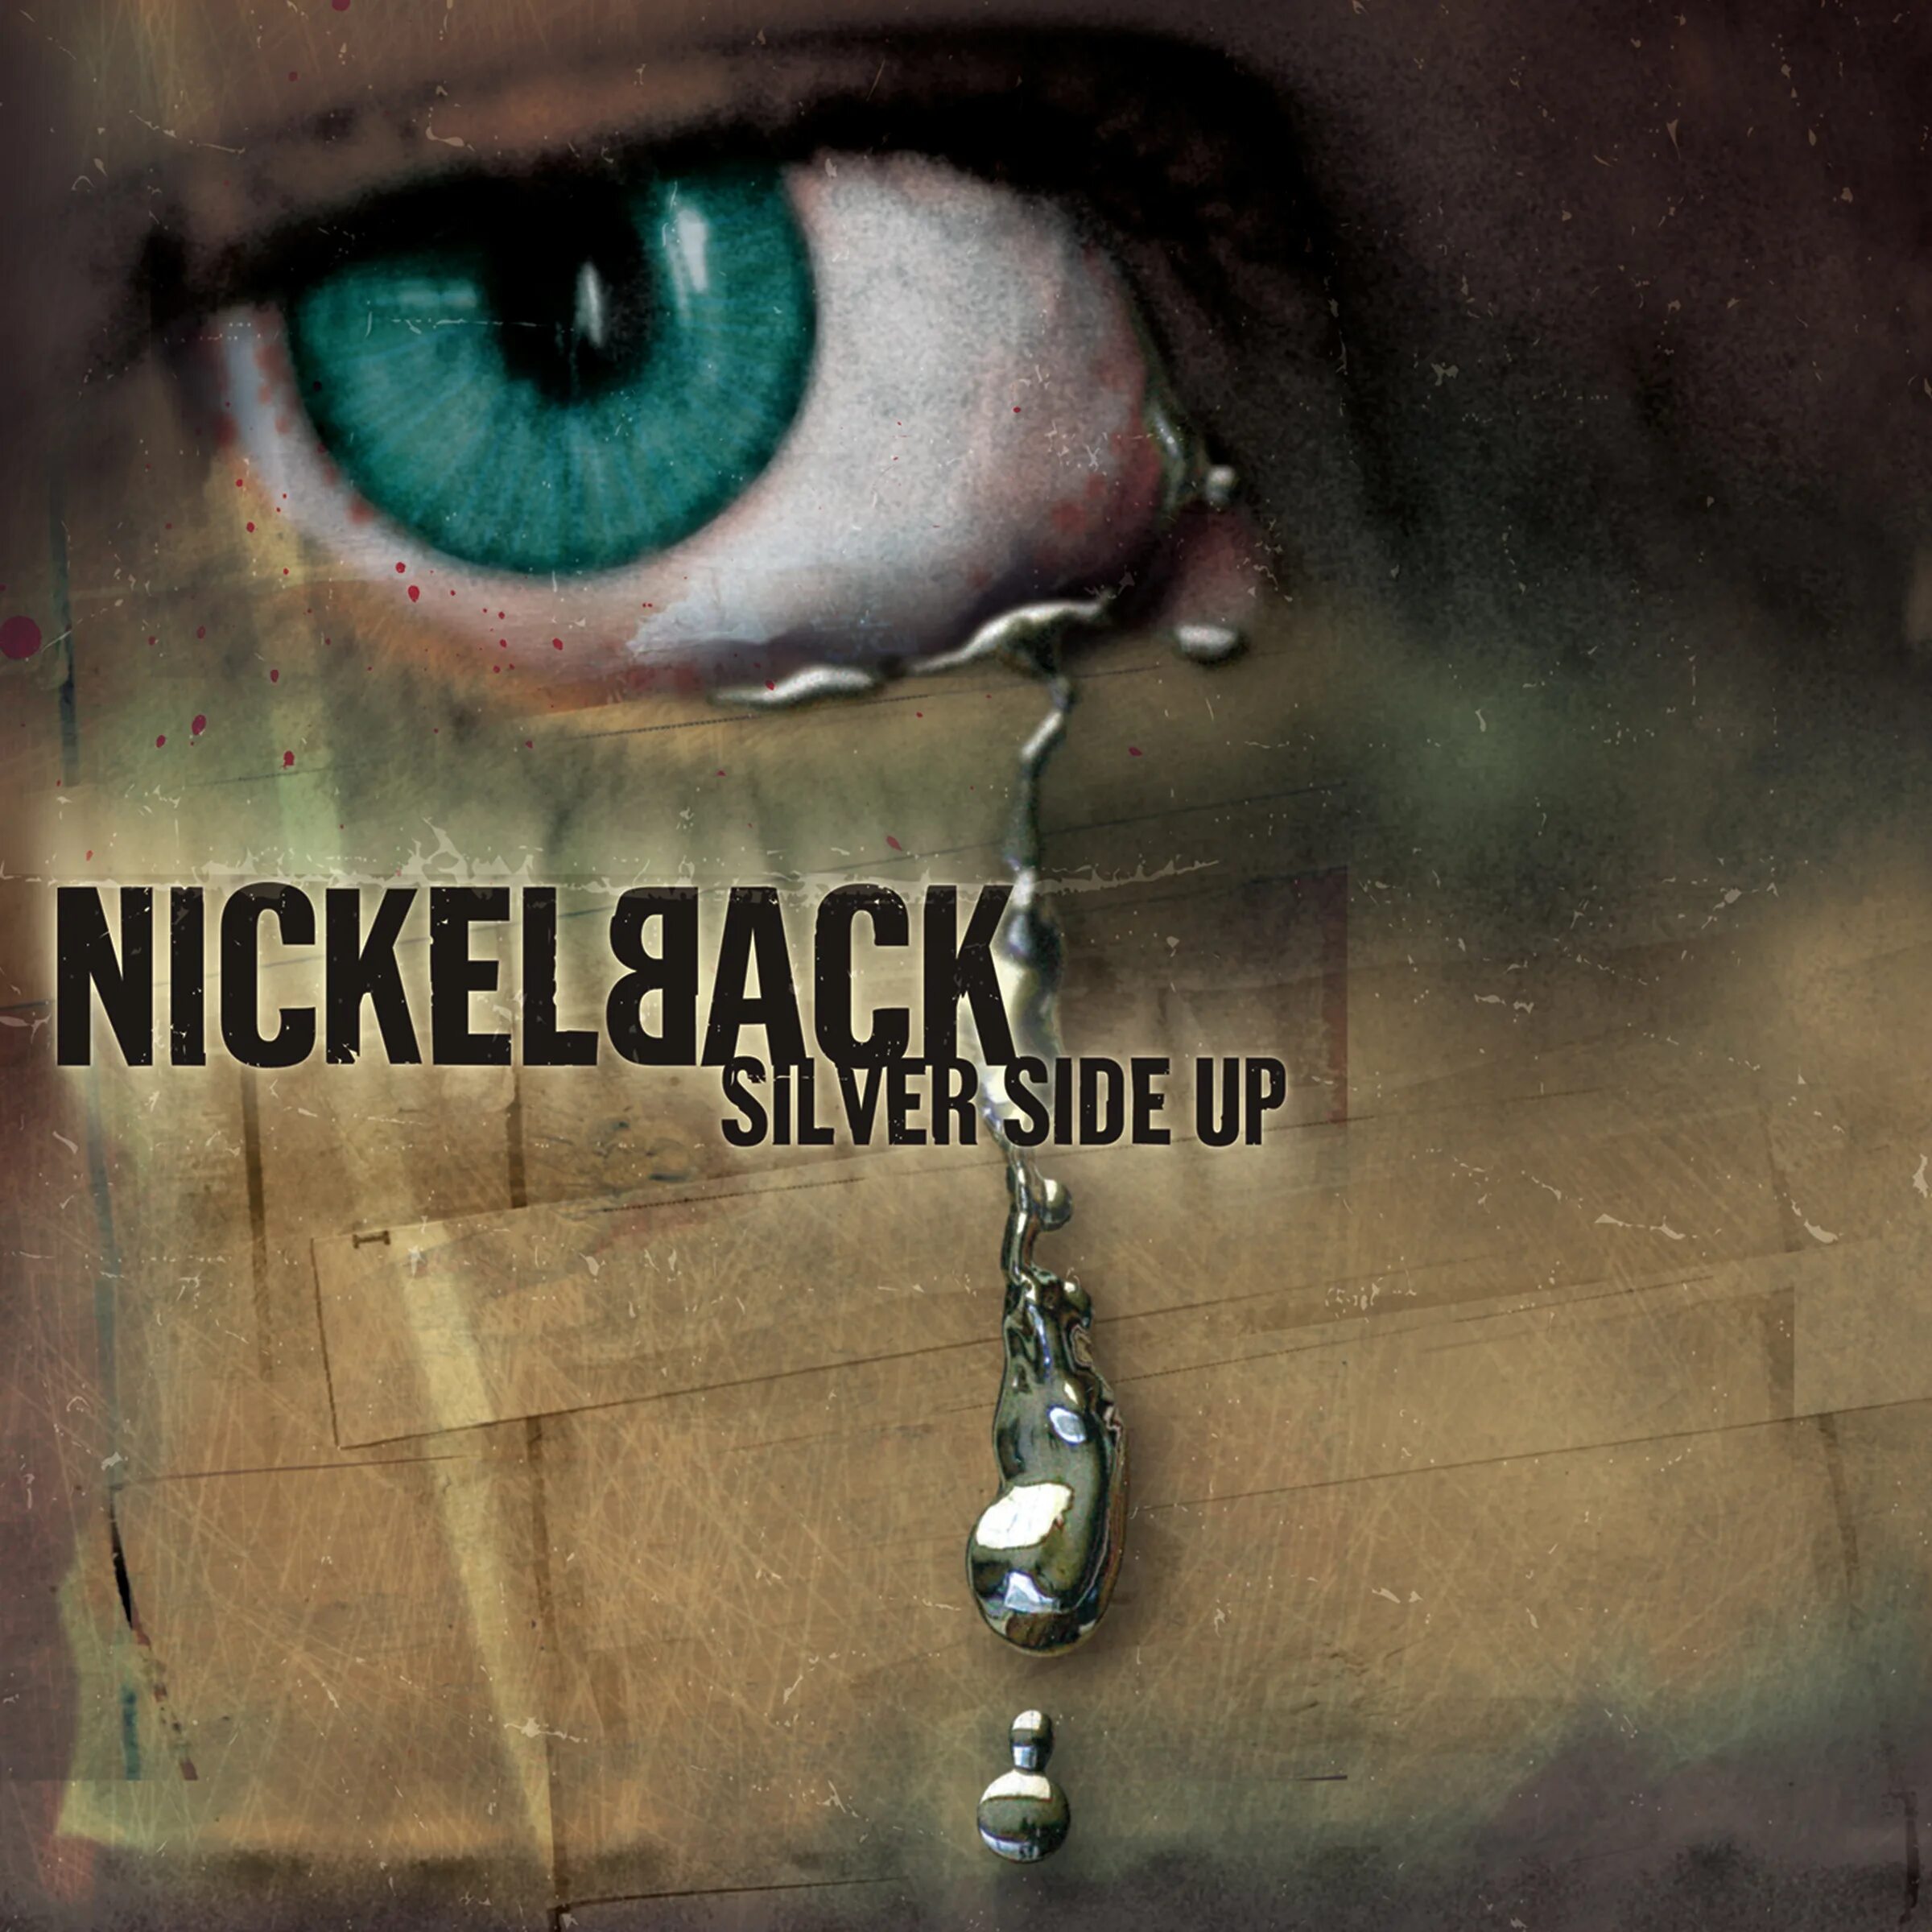 Side me up. Nickelback "Silver Side up". 2001 - Silver Side up. Nickelback Silver Side up 2001. Nickelback Silver Side up обложка.